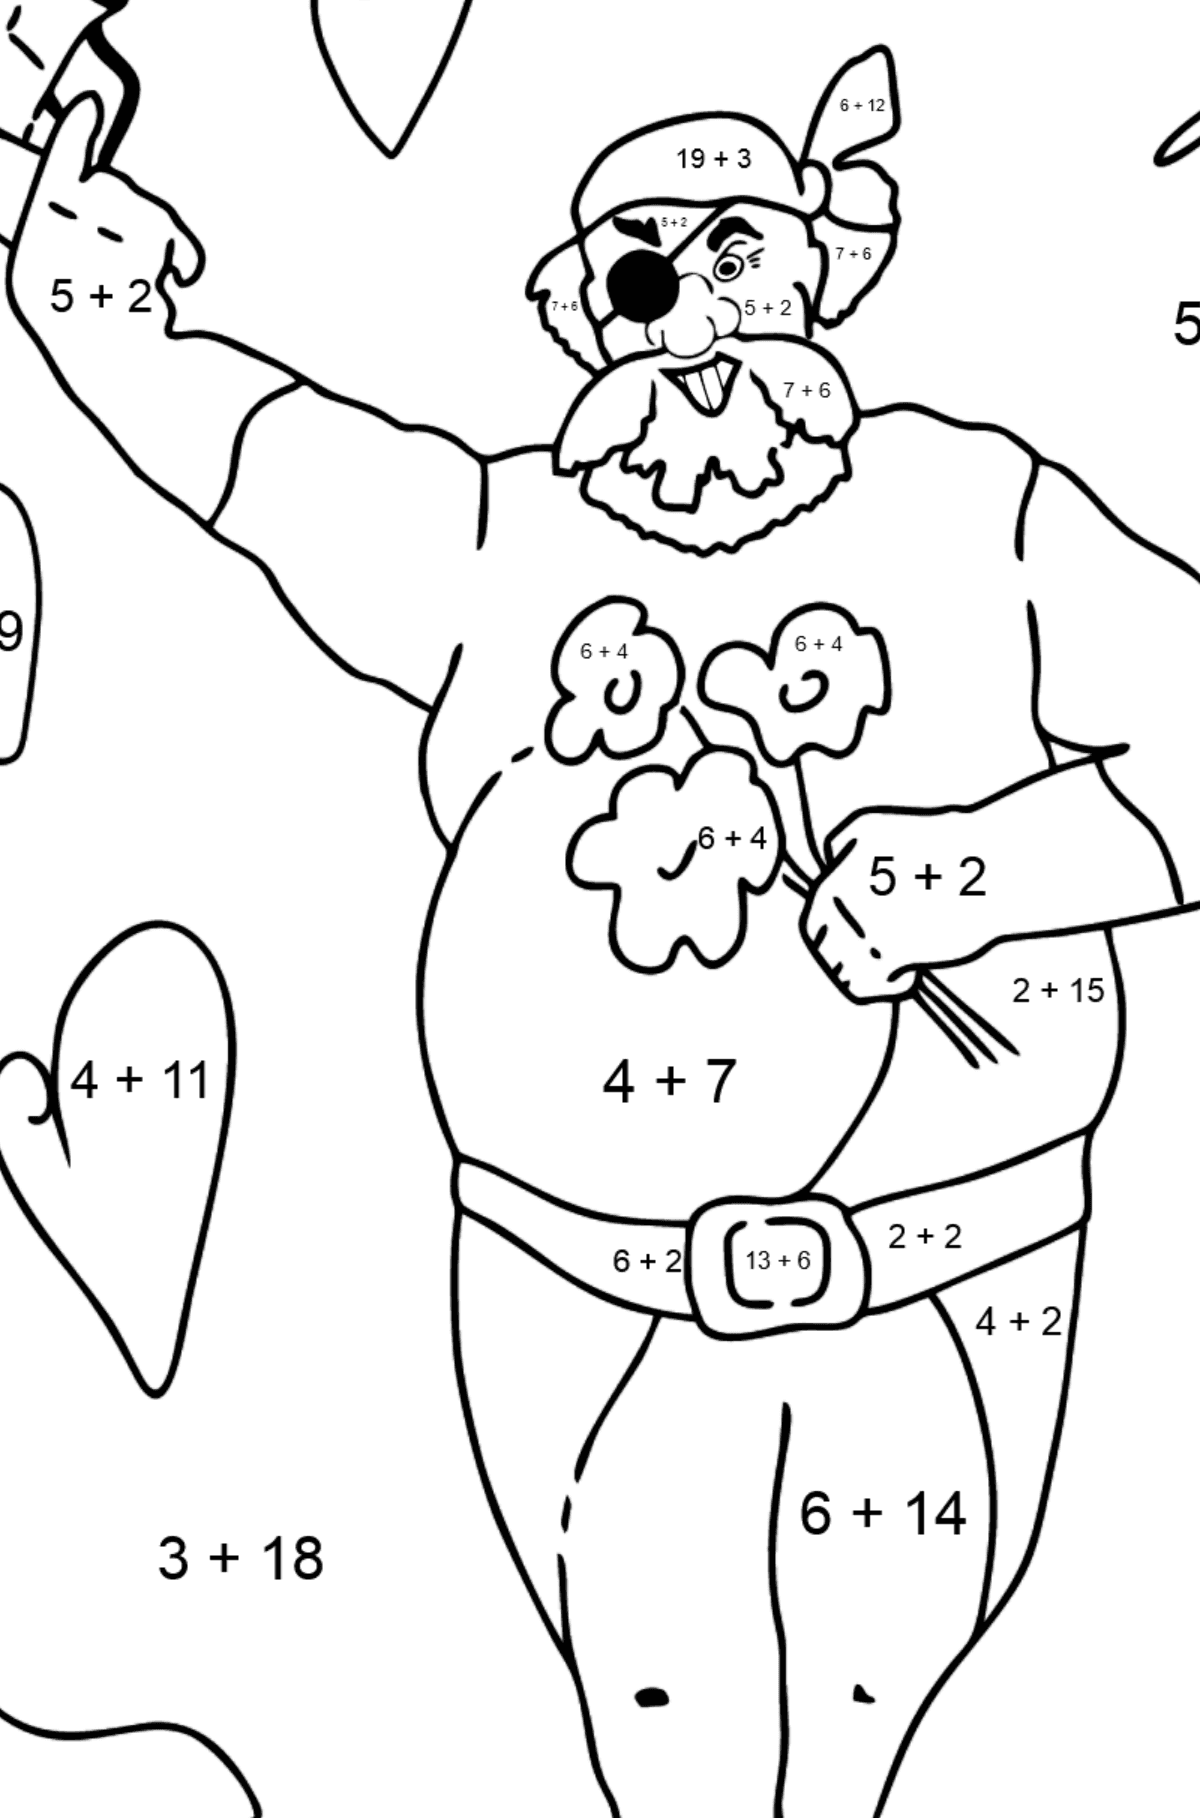 Coloring Page - A Romantic Pirate - Math Coloring - Addition for Kids